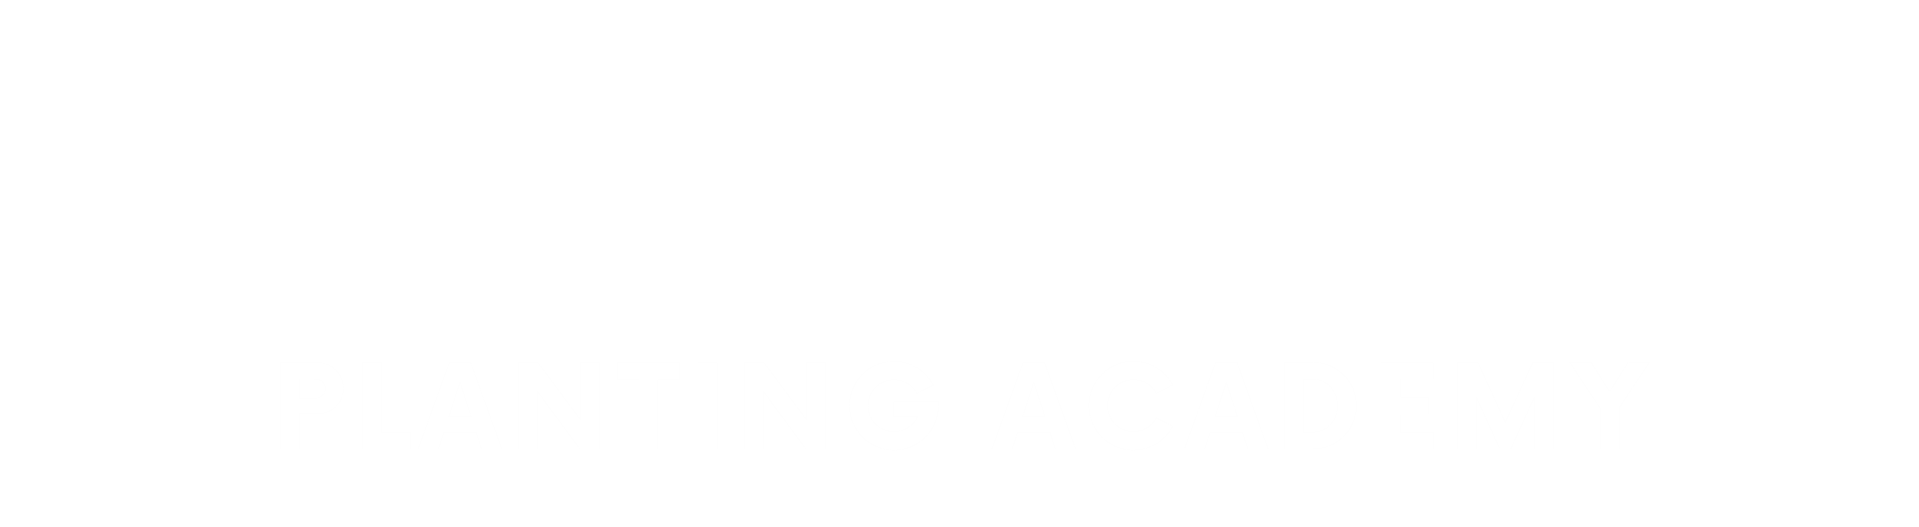 The Planting Academy